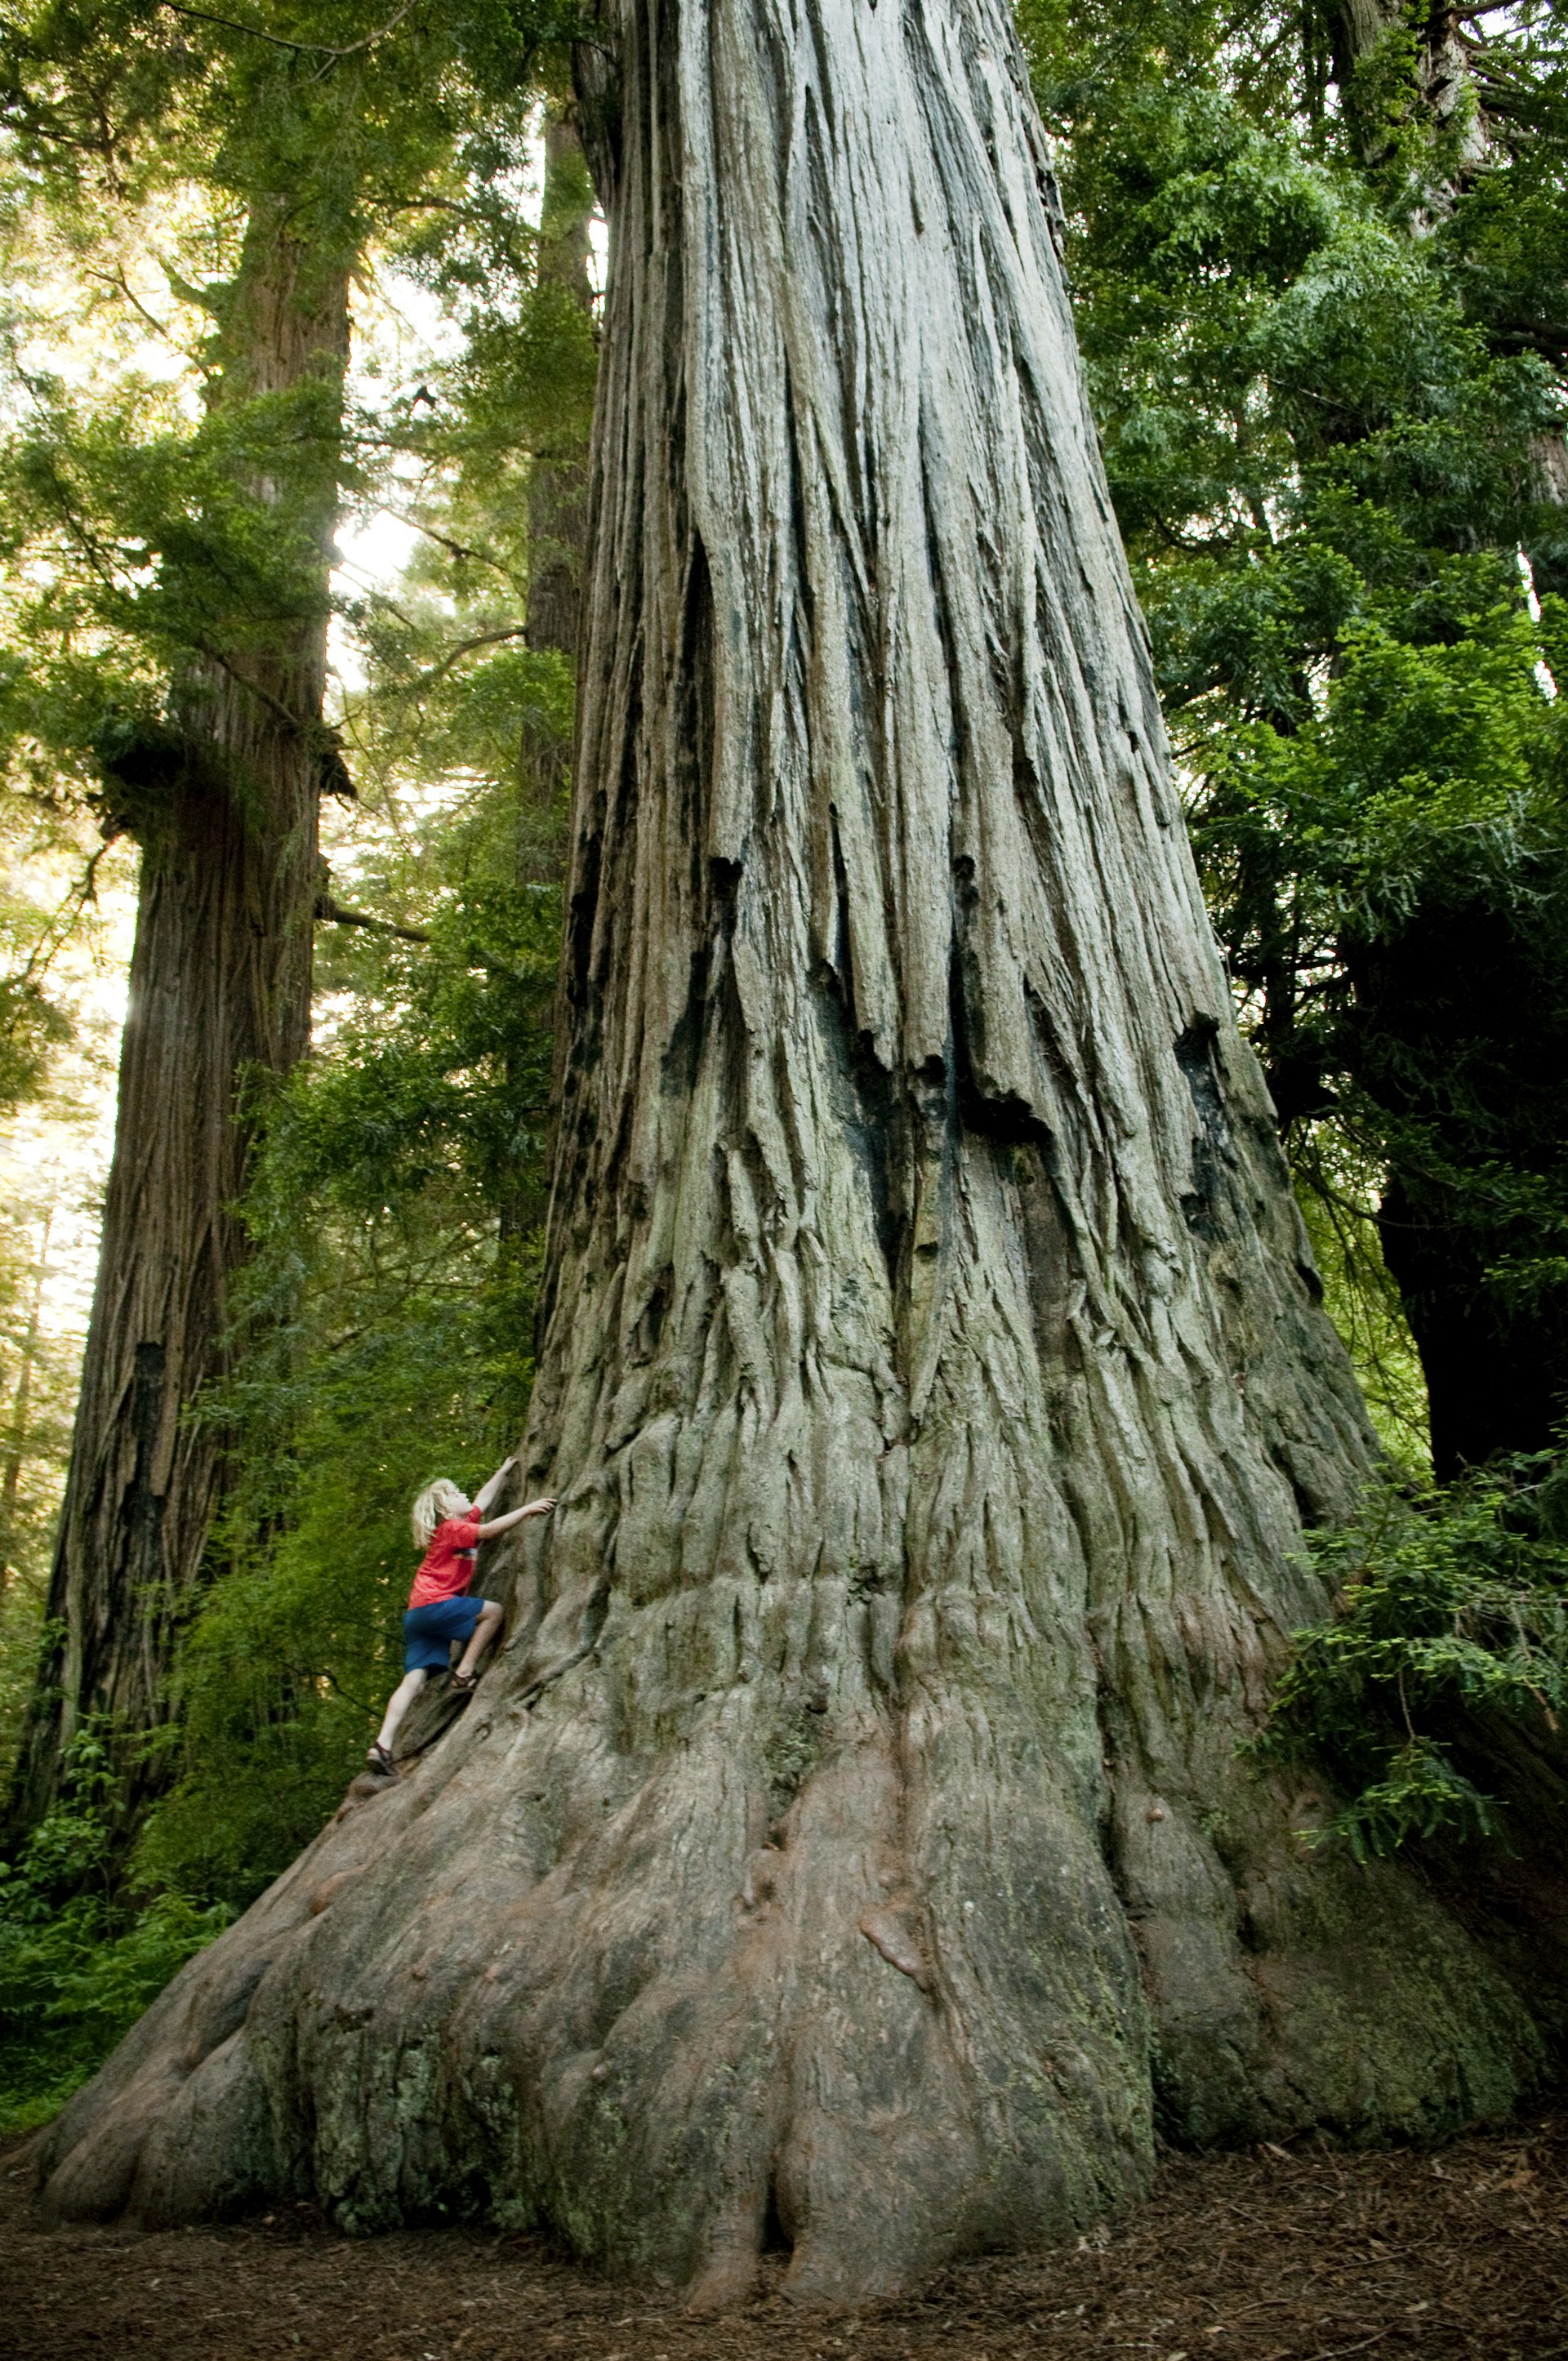 A young boy climbing on a giant coast redwood tree